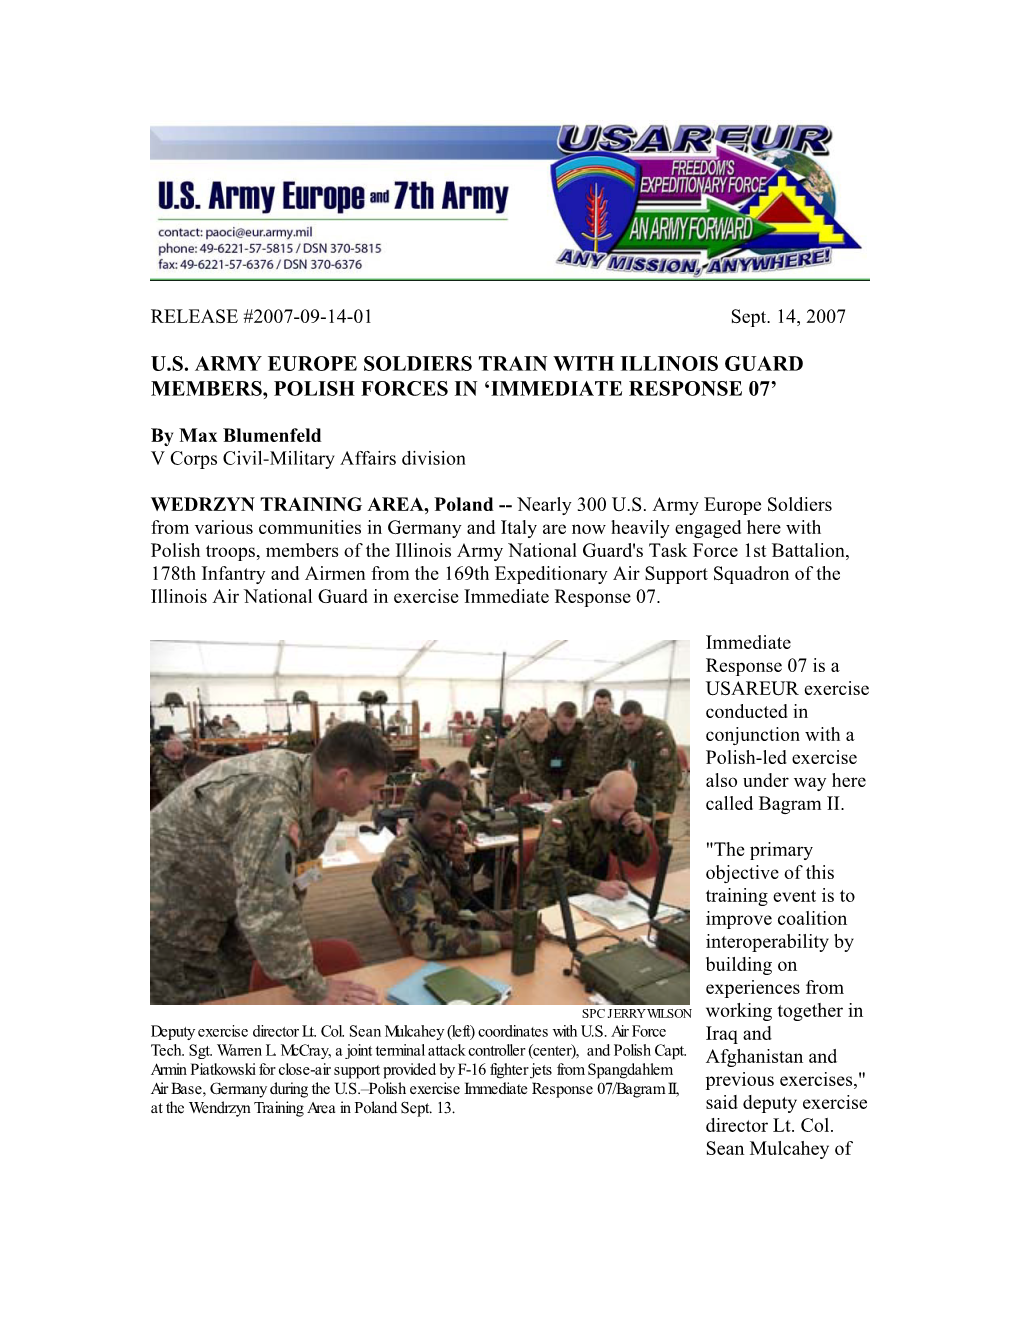 U.S. Army Europe Soldiers Train with Illinois Guard Members, Polish Forces in ‘Immediate Response 07’